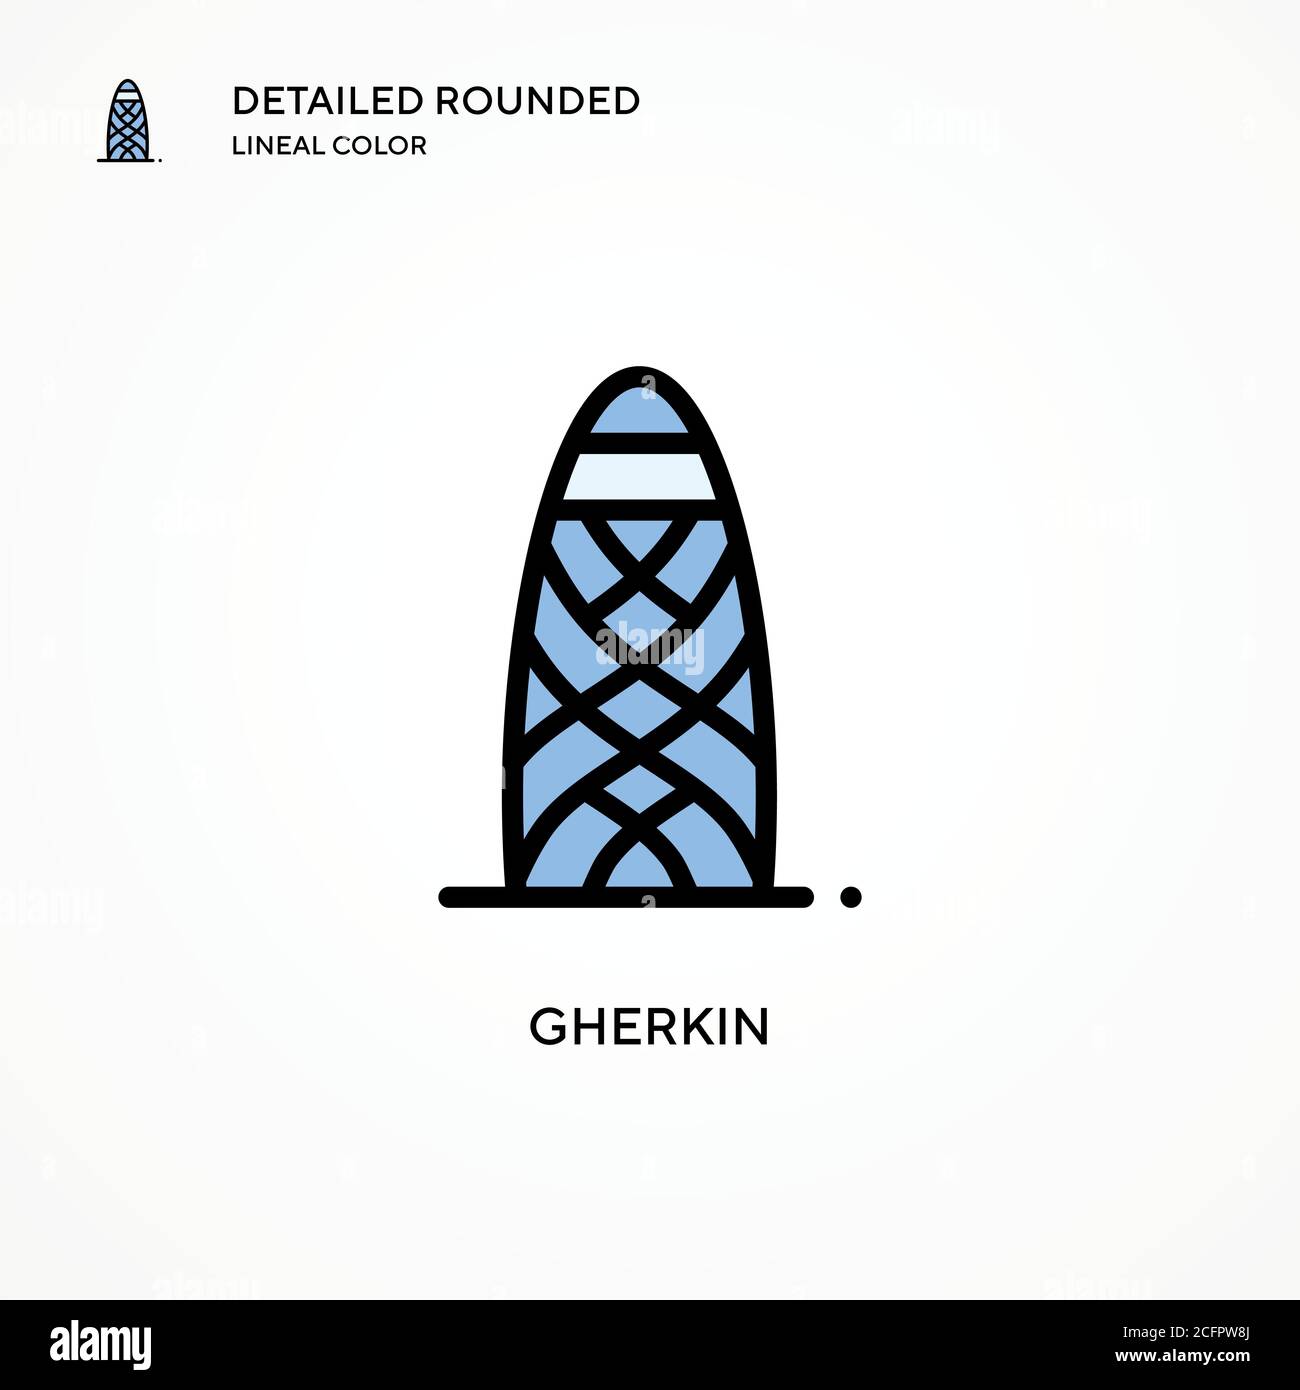 Gherkin vector icon. Modern vector illustration concepts. Easy to edit and customize. Stock Vector